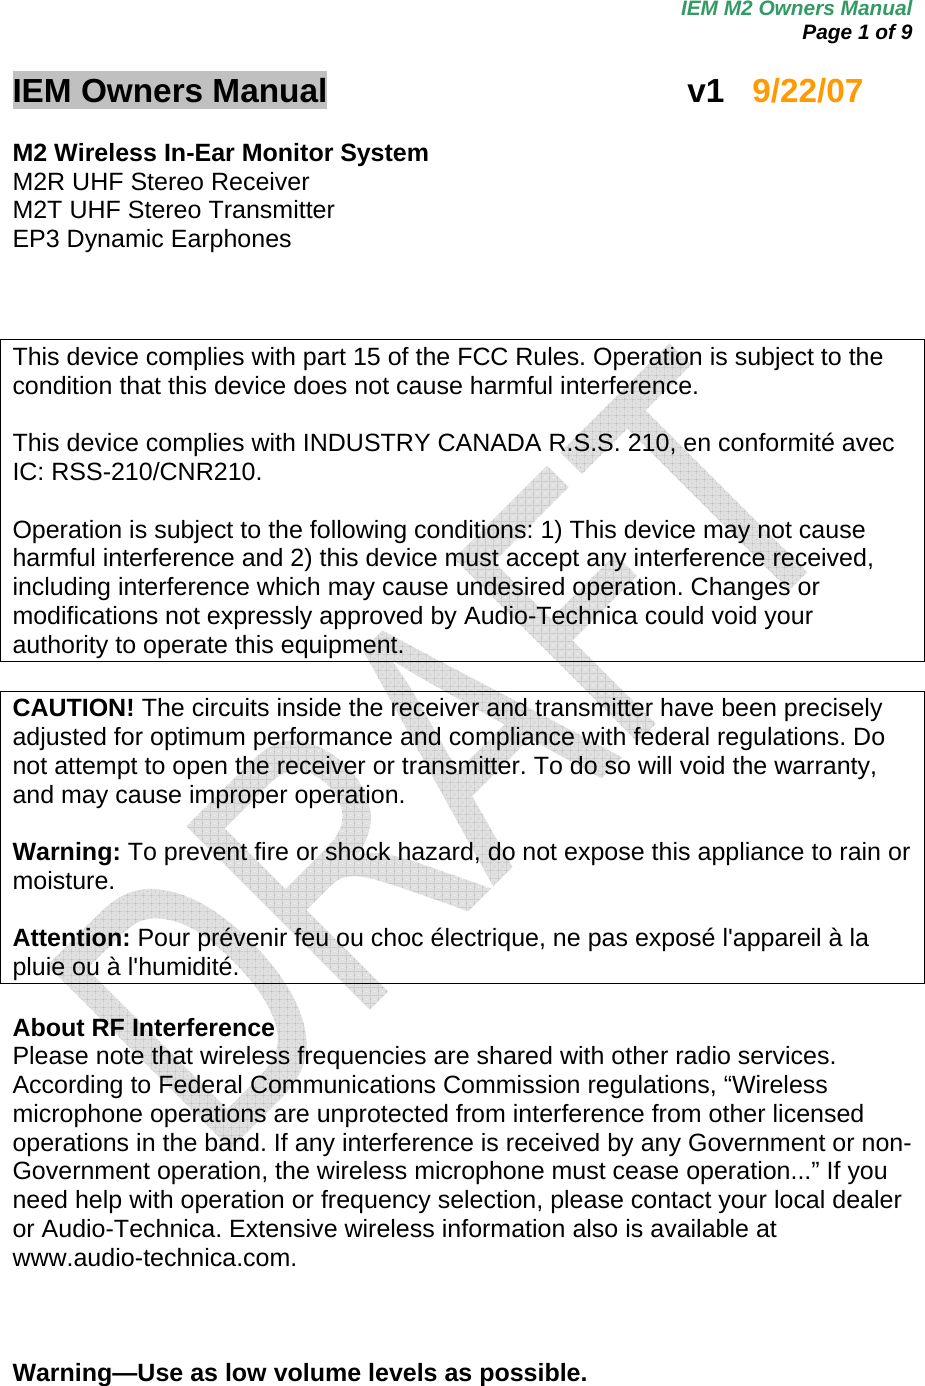 IEM M2 Owners Manual  Page 1 of 9  IEM Owners Manual     v1   9/22/07  M2 Wireless In-Ear Monitor System M2R UHF Stereo Receiver M2T UHF Stereo Transmitter EP3 Dynamic Earphones    This device complies with part 15 of the FCC Rules. Operation is subject to the condition that this device does not cause harmful interference.  This device complies with INDUSTRY CANADA R.S.S. 210, en conformité avec IC: RSS-210/CNR210.  Operation is subject to the following conditions: 1) This device may not cause harmful interference and 2) this device must accept any interference received, including interference which may cause undesired operation. Changes or modifications not expressly approved by Audio-Technica could void your authority to operate this equipment.  CAUTION! The circuits inside the receiver and transmitter have been precisely adjusted for optimum performance and compliance with federal regulations. Do not attempt to open the receiver or transmitter. To do so will void the warranty, and may cause improper operation.  Warning: To prevent fire or shock hazard, do not expose this appliance to rain or moisture.  Attention: Pour prévenir feu ou choc électrique, ne pas exposé l&apos;appareil à la pluie ou à l&apos;humidité.  About RF Interference Please note that wireless frequencies are shared with other radio services. According to Federal Communications Commission regulations, “Wireless microphone operations are unprotected from interference from other licensed operations in the band. If any interference is received by any Government or non-Government operation, the wireless microphone must cease operation...” If you need help with operation or frequency selection, please contact your local dealer or Audio-Technica. Extensive wireless information also is available at www.audio-technica.com.     Warning—Use as low volume levels as possible. 